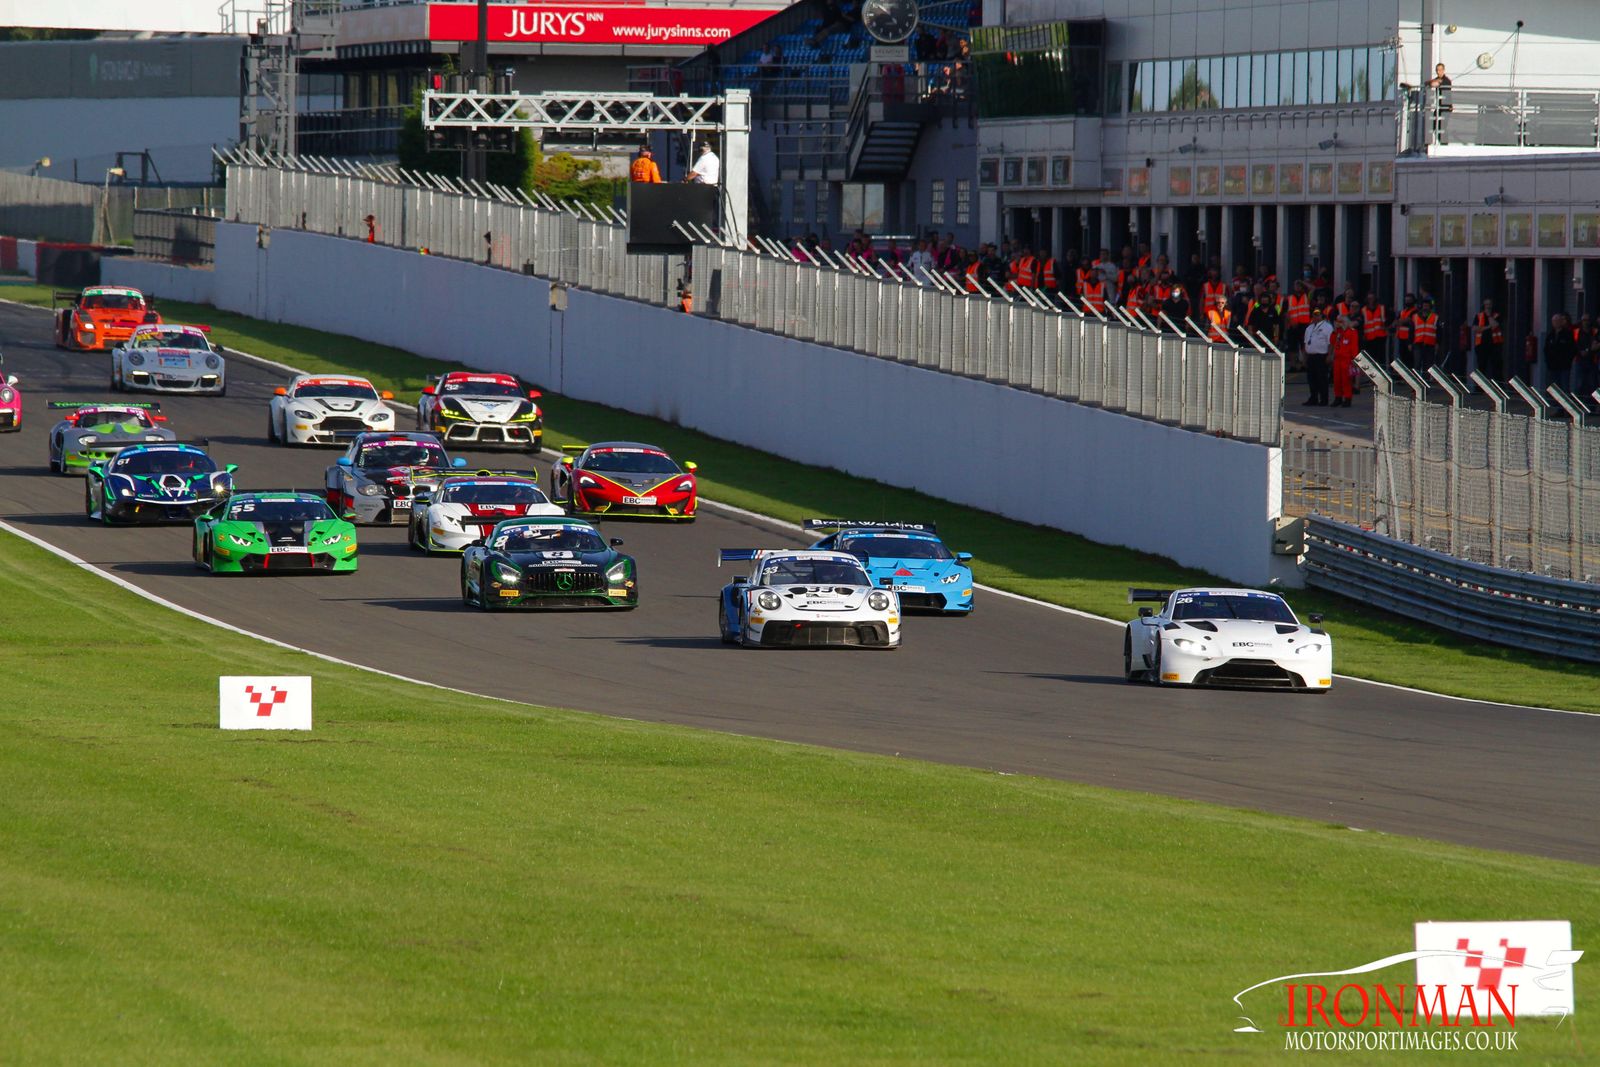 GT CUP 2021 season looks set to be another cracker!!